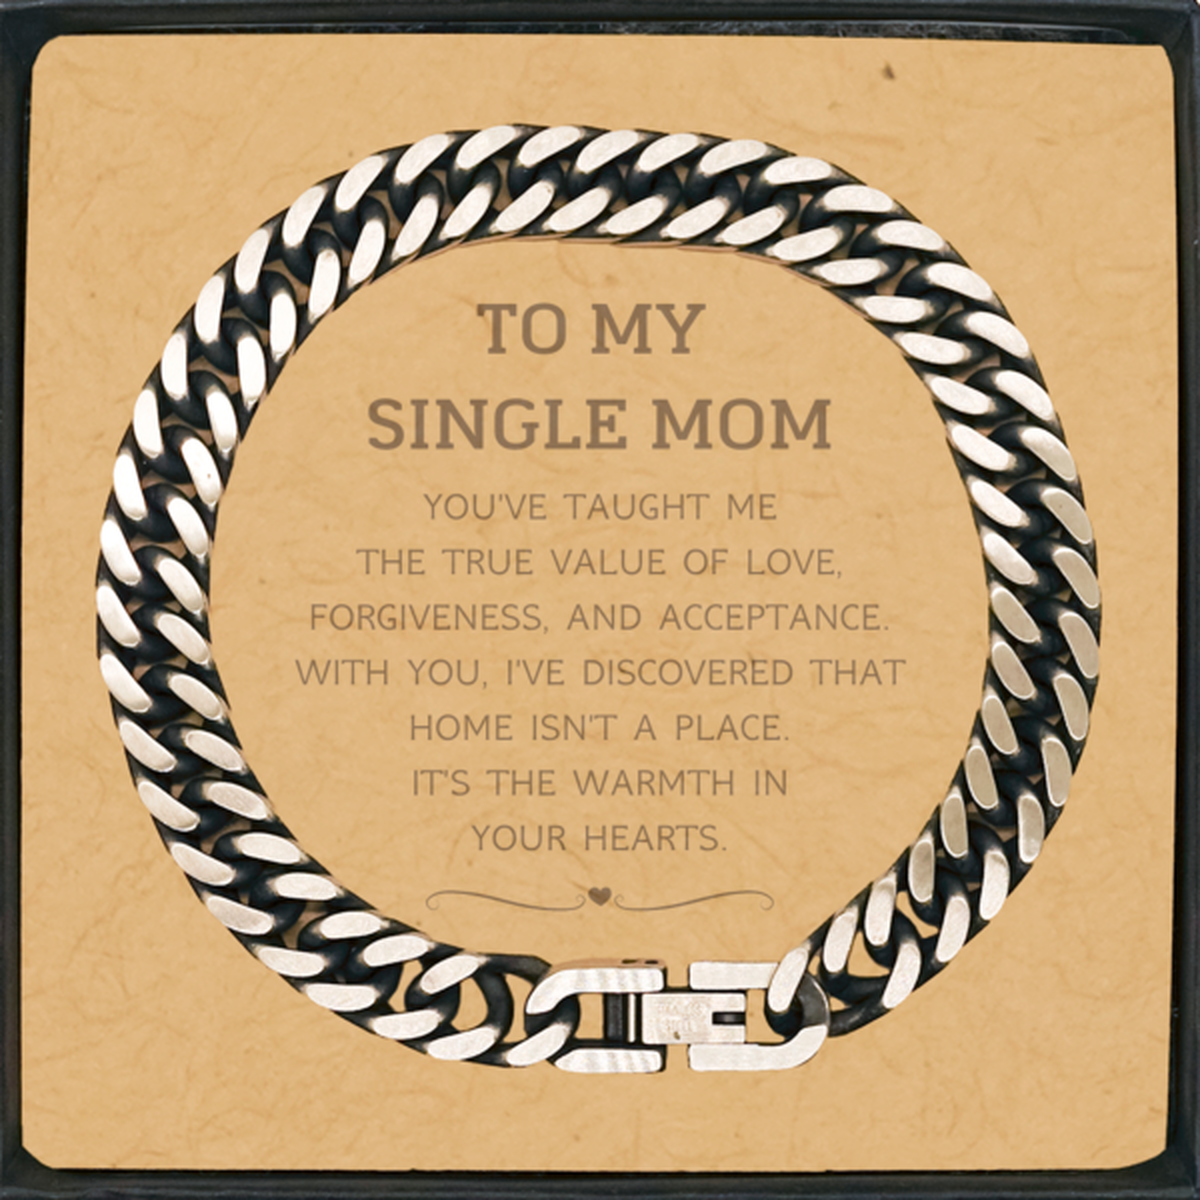 To My Single Mom Gifts, You've taught me the true value of love, Thank You Gifts For Single Mom, Birthday Cuban Link Chain Bracelet For Single Mom